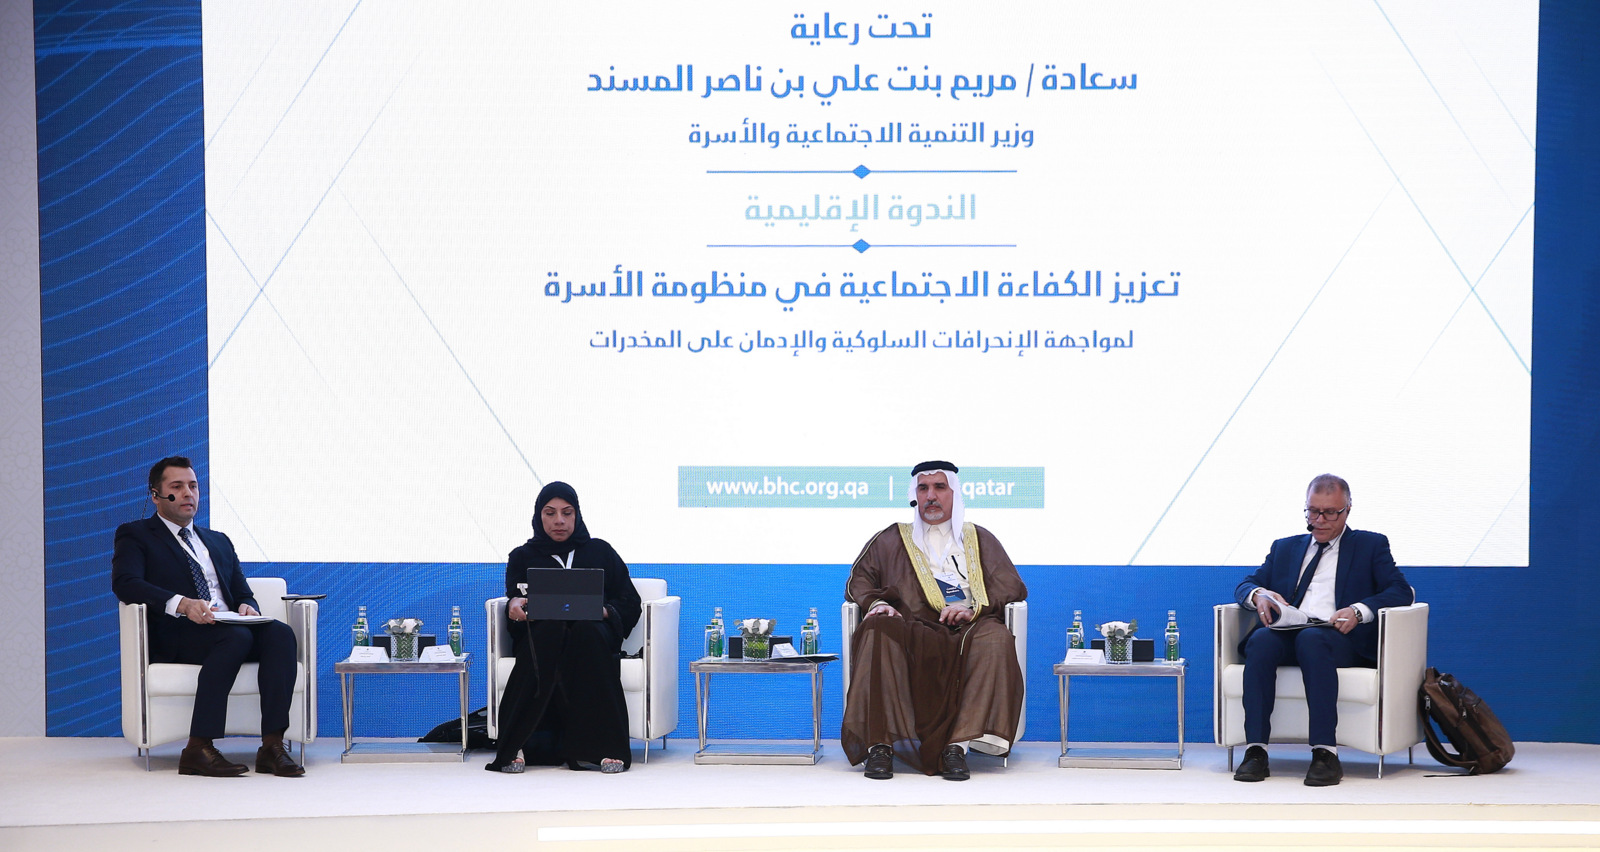 The Doha International Family Institute participation in the regional seminar under the patronage of Her Excellency, the Minister of Social Development and Family